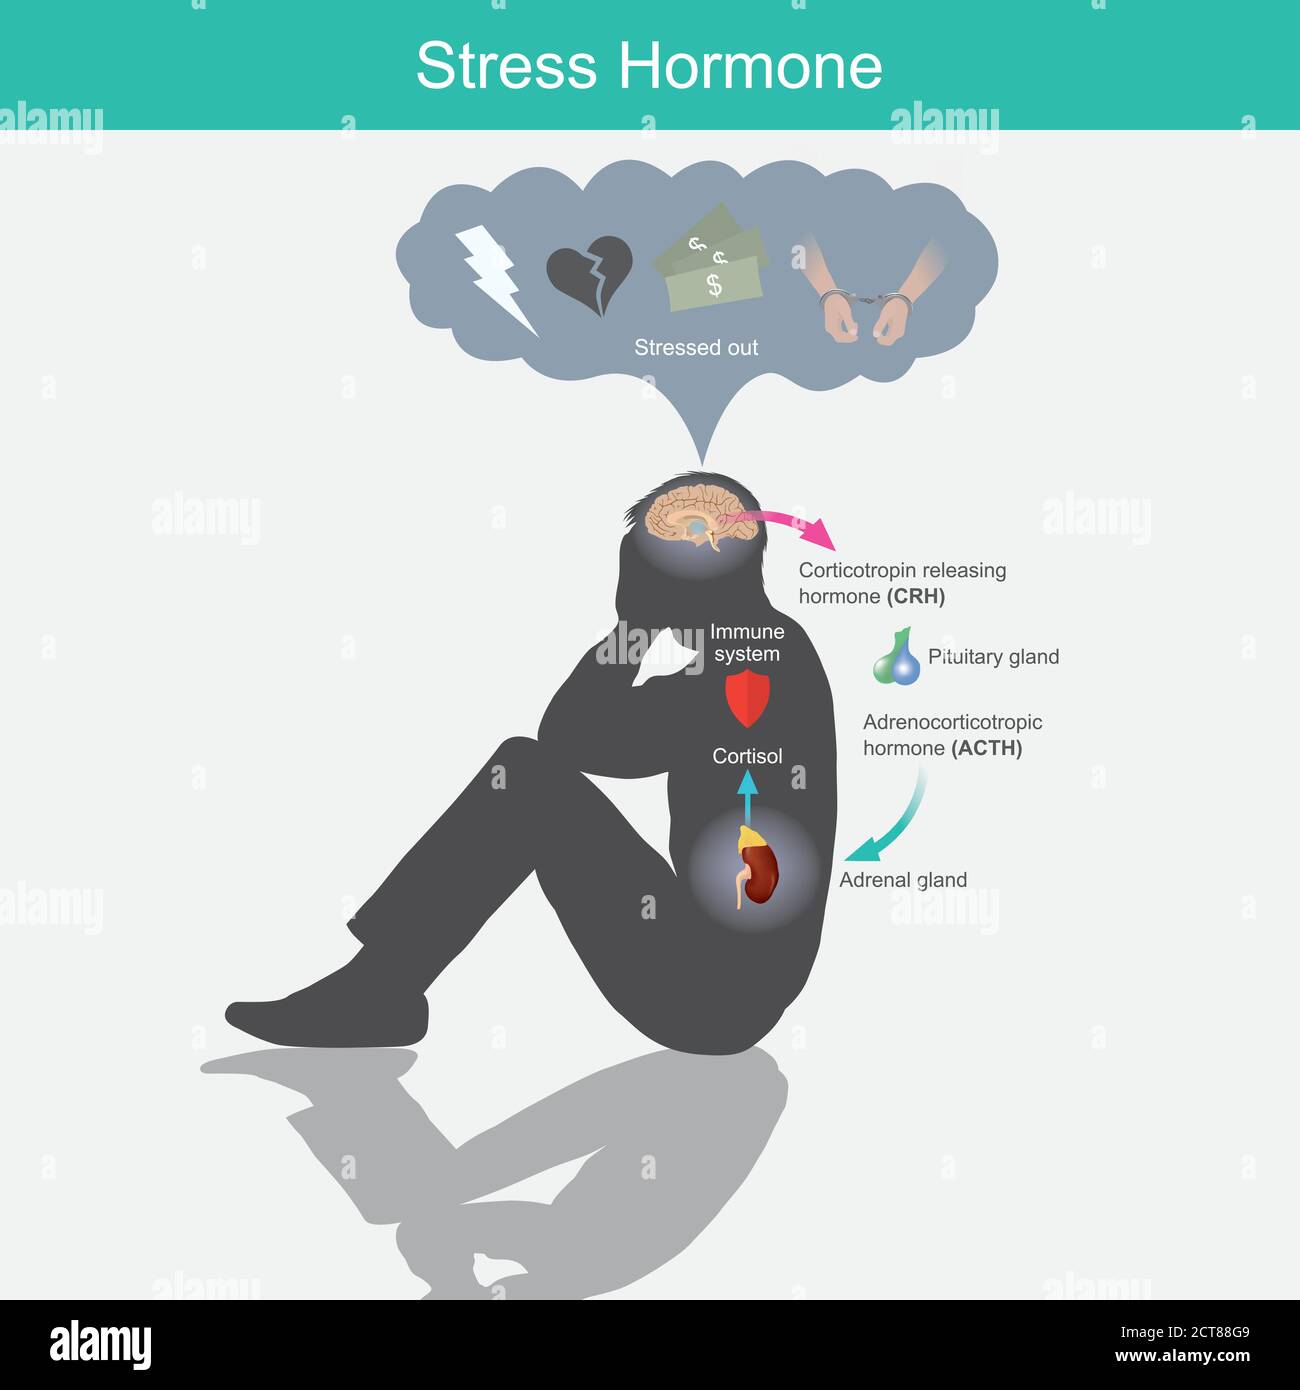 Stress Hormone. Diagram showing the stress response in human body from stimulation of the brain. Stock Vector